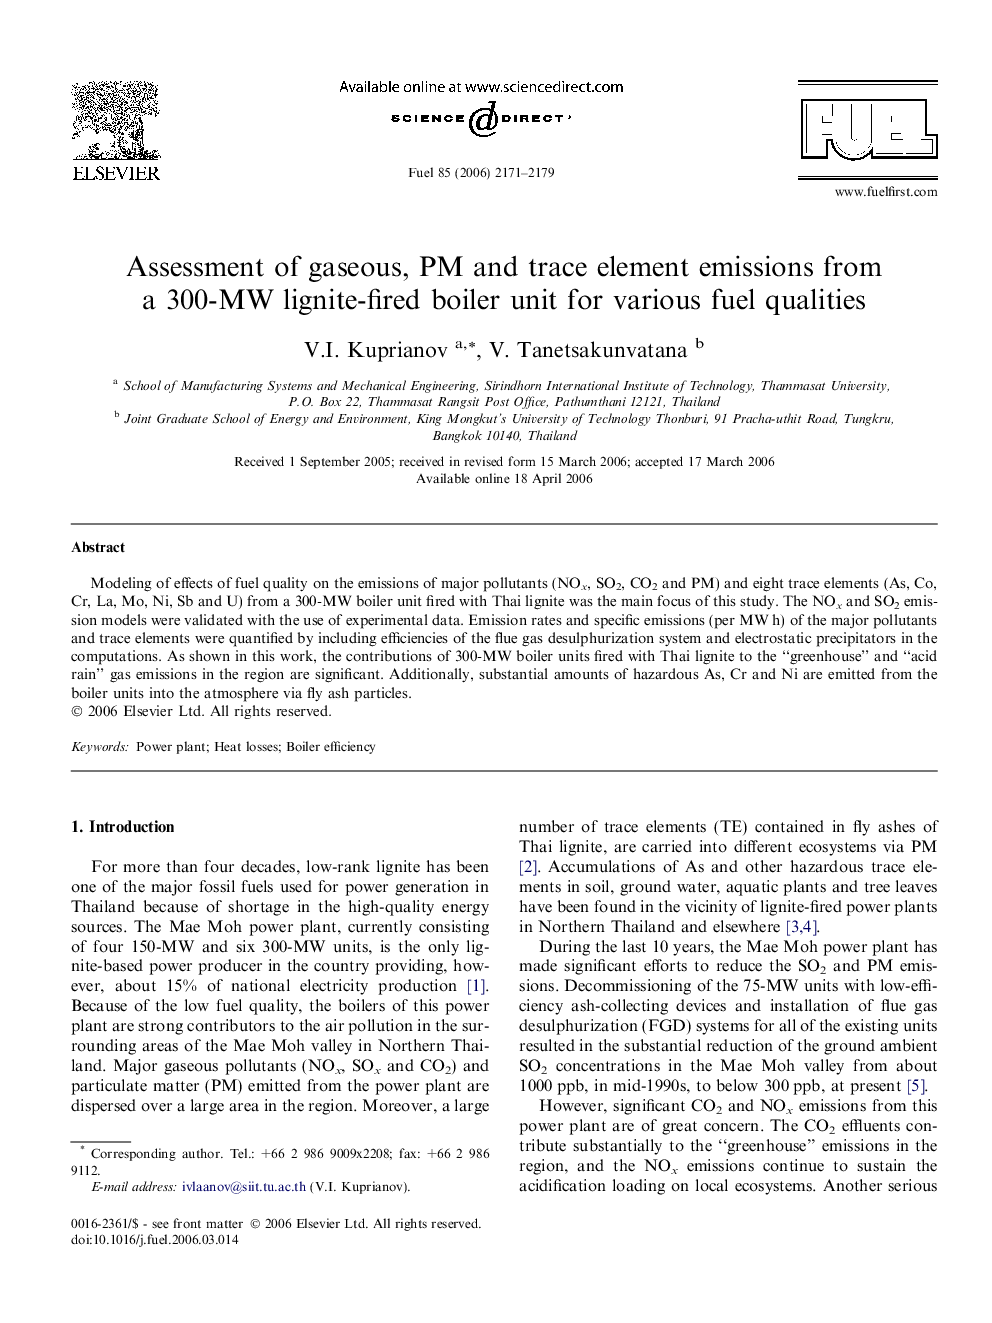 Assessment of gaseous, PM and trace element emissions from a 300-MW lignite-fired boiler unit for various fuel qualities